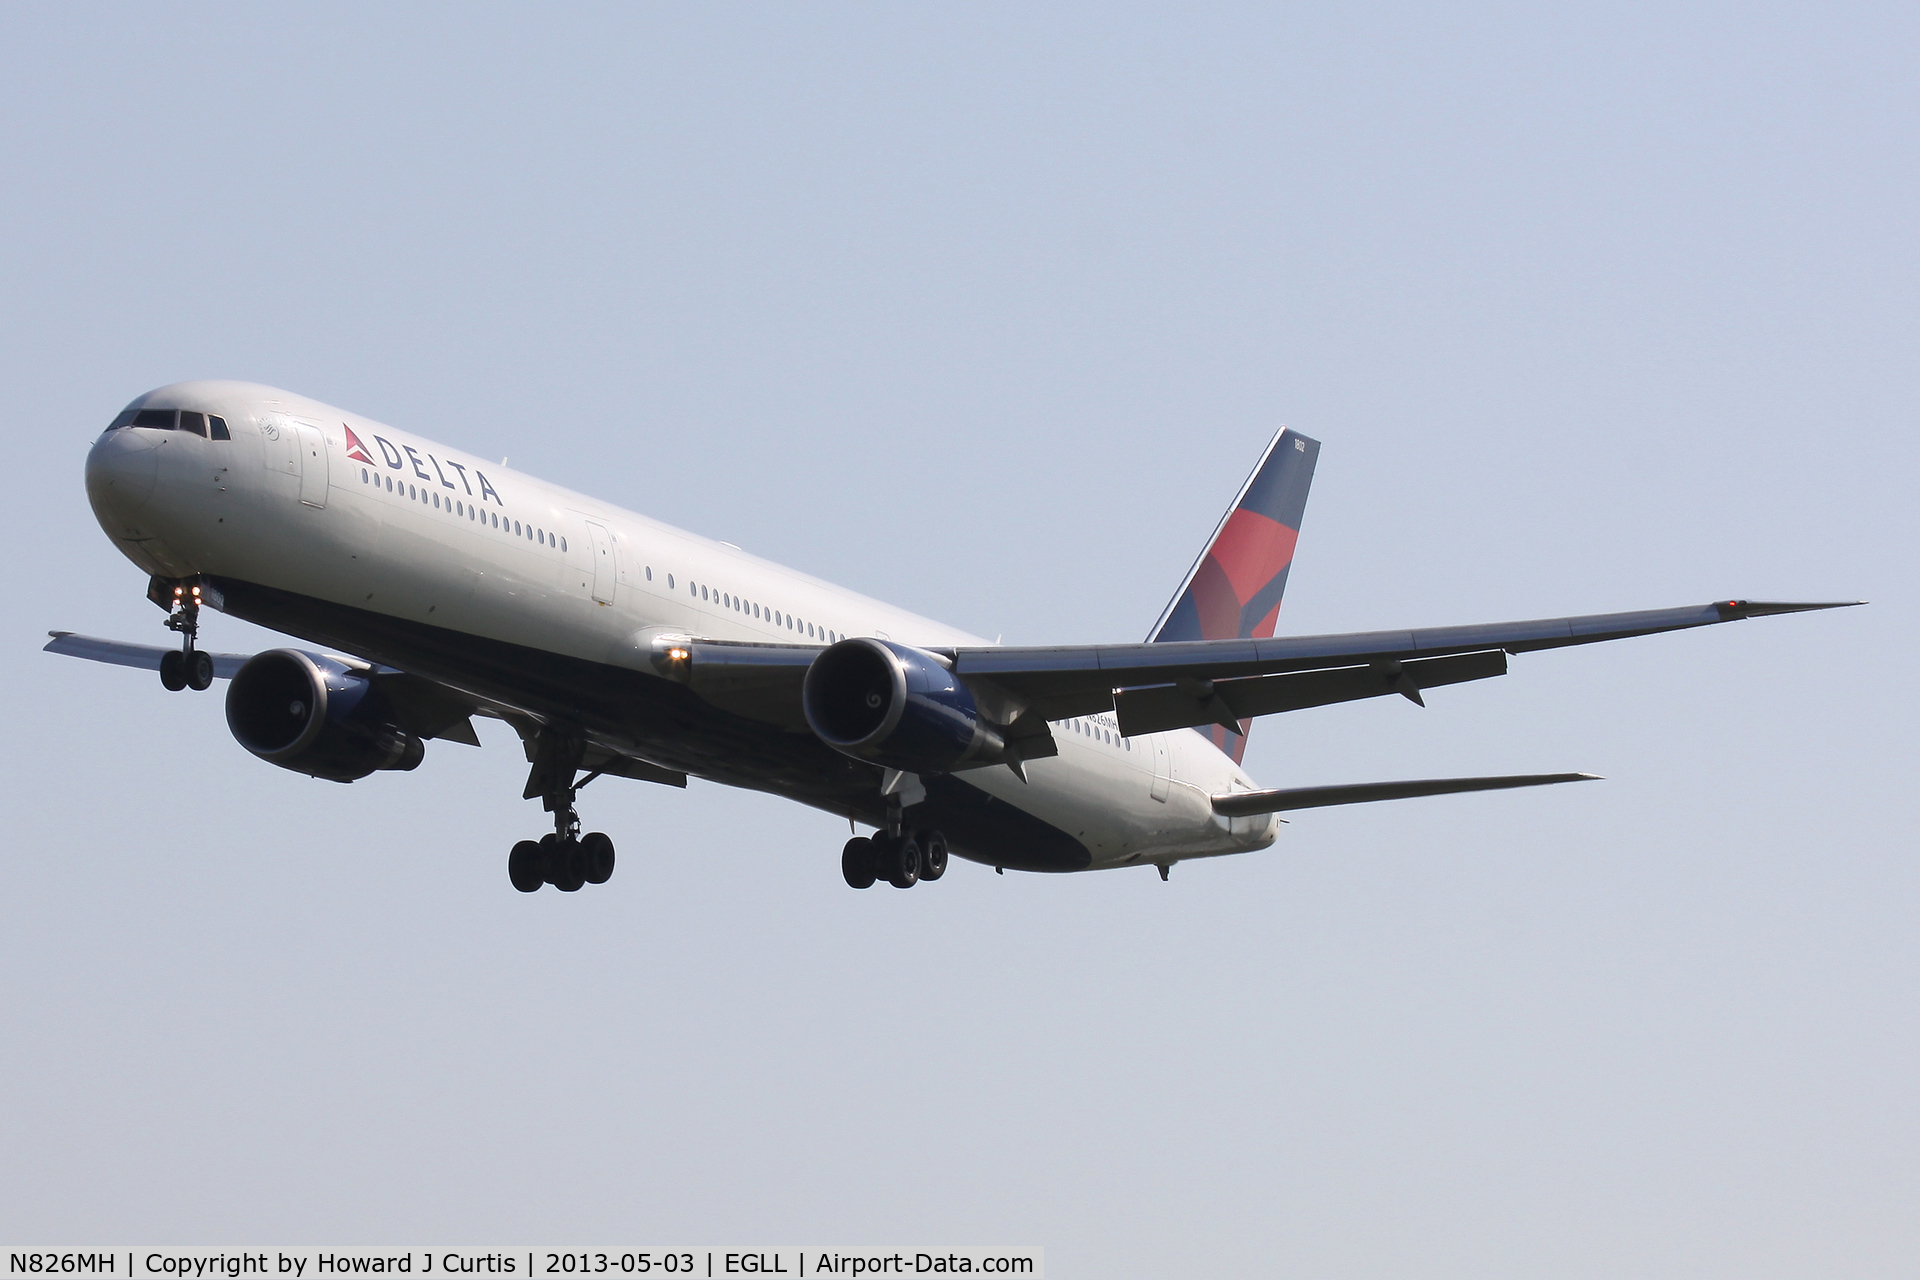 N826MH, 1999 Boeing 767-432/ER C/N 29713, Delta Airlines, on approach to runway 27L.